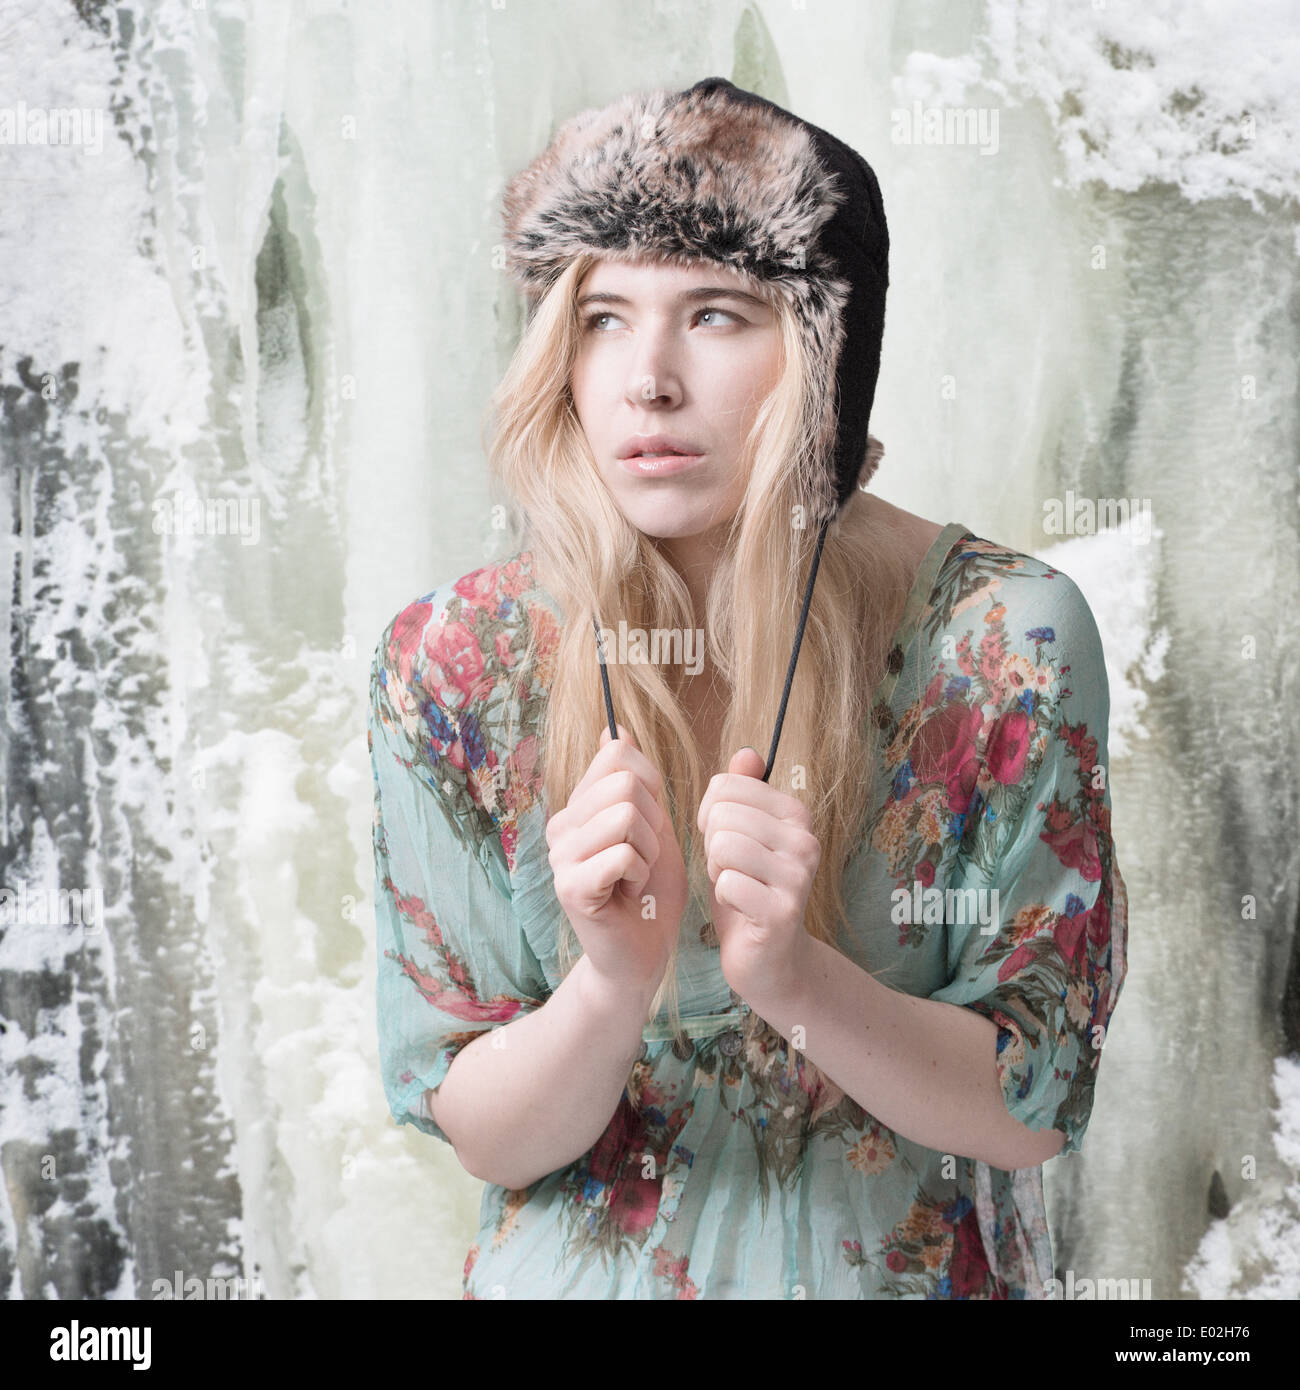 Blonde woman in front of ice covered mountain wearing summer dress and winter hat Stock Photo